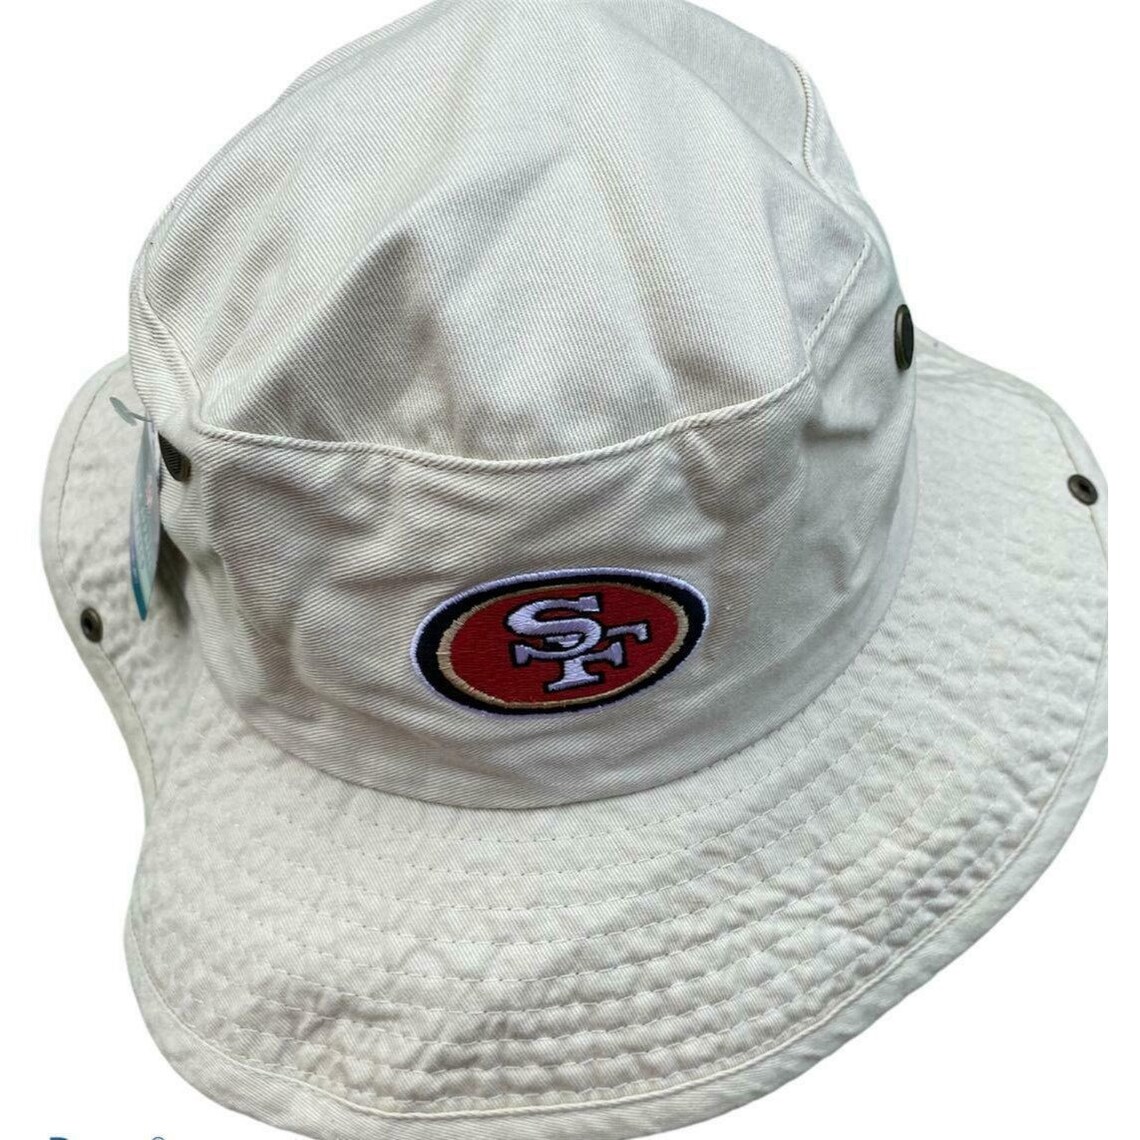 San Francisco 49ers Floppy Field Safari Hat Great for the | Etsy